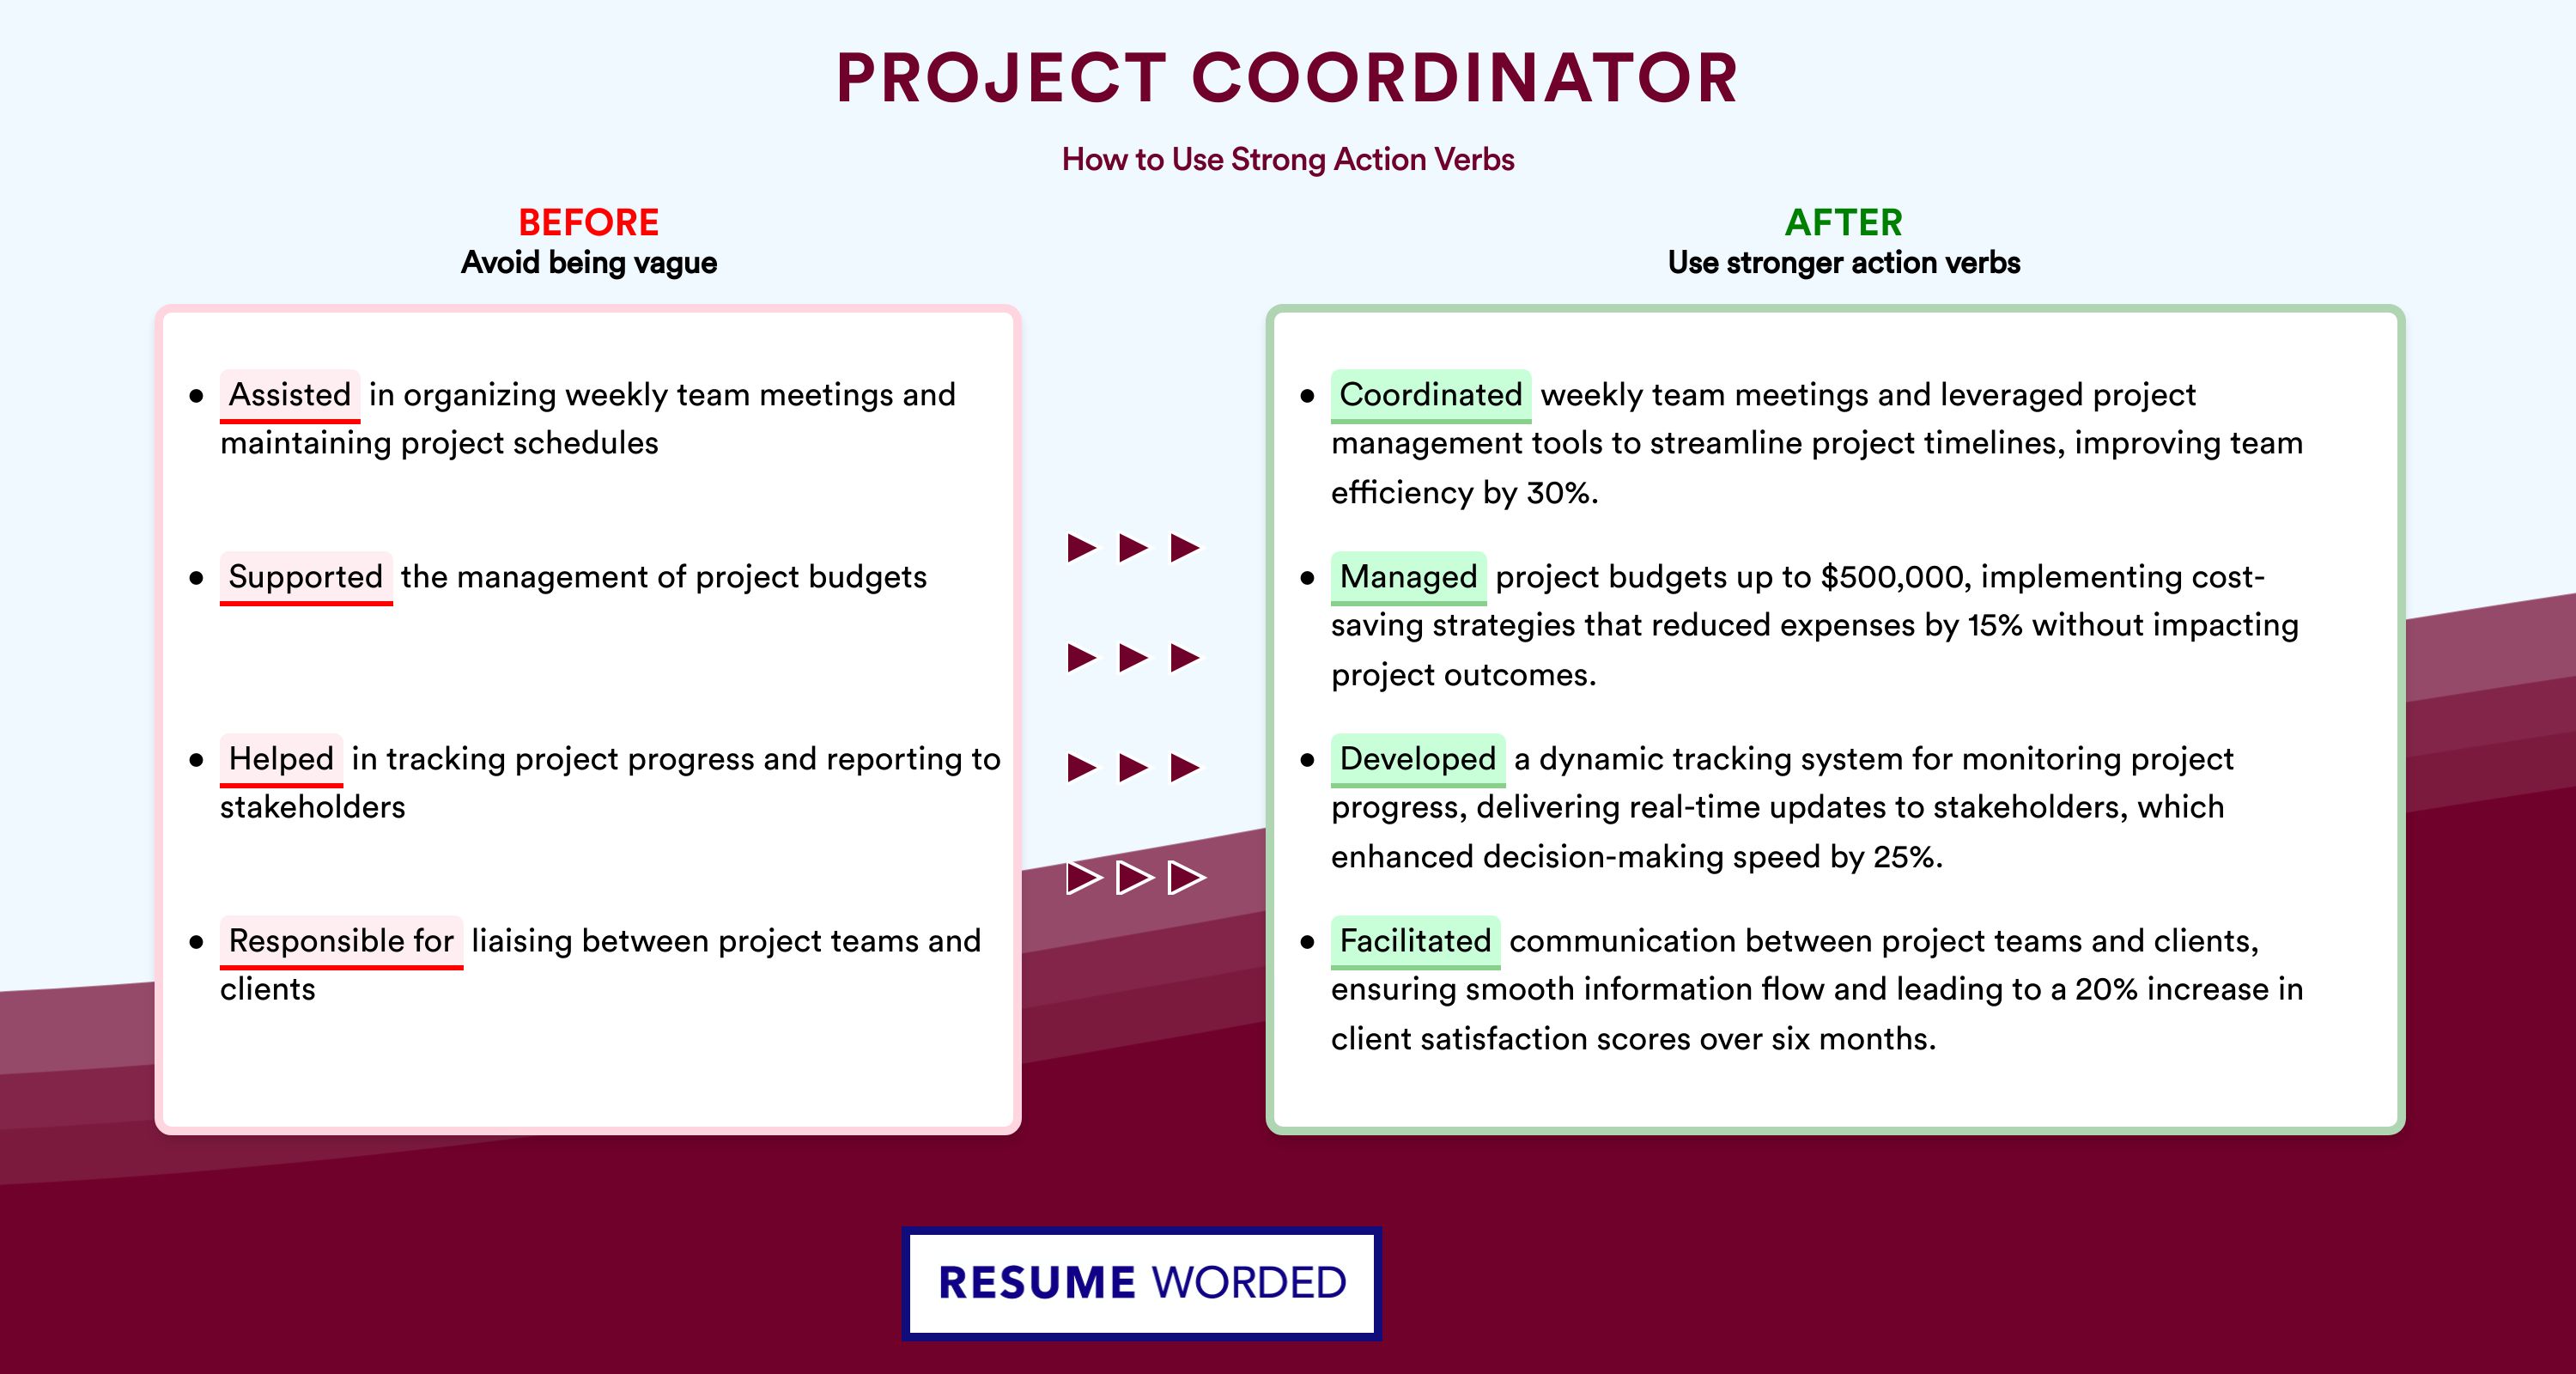 Action Verbs for Project Coordinator